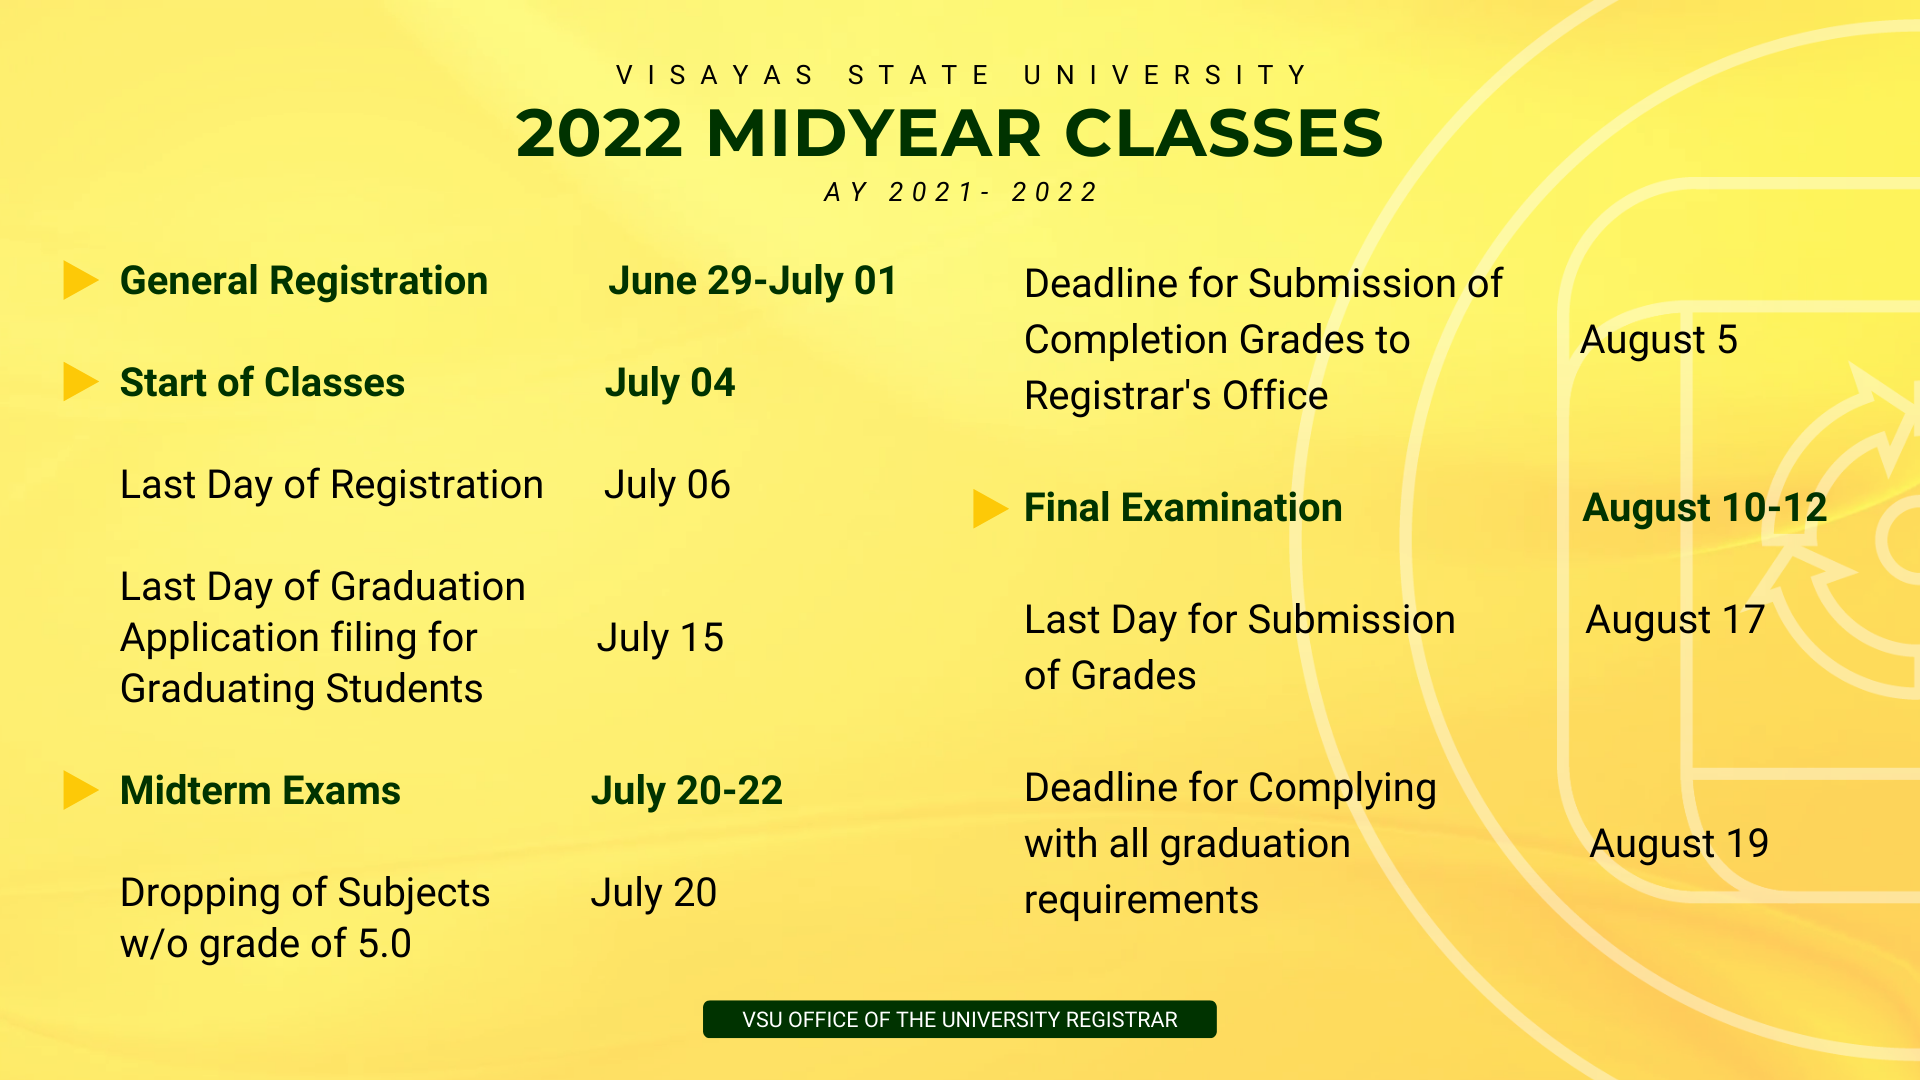 A.Y. 2021-2022 Mid Year Classes